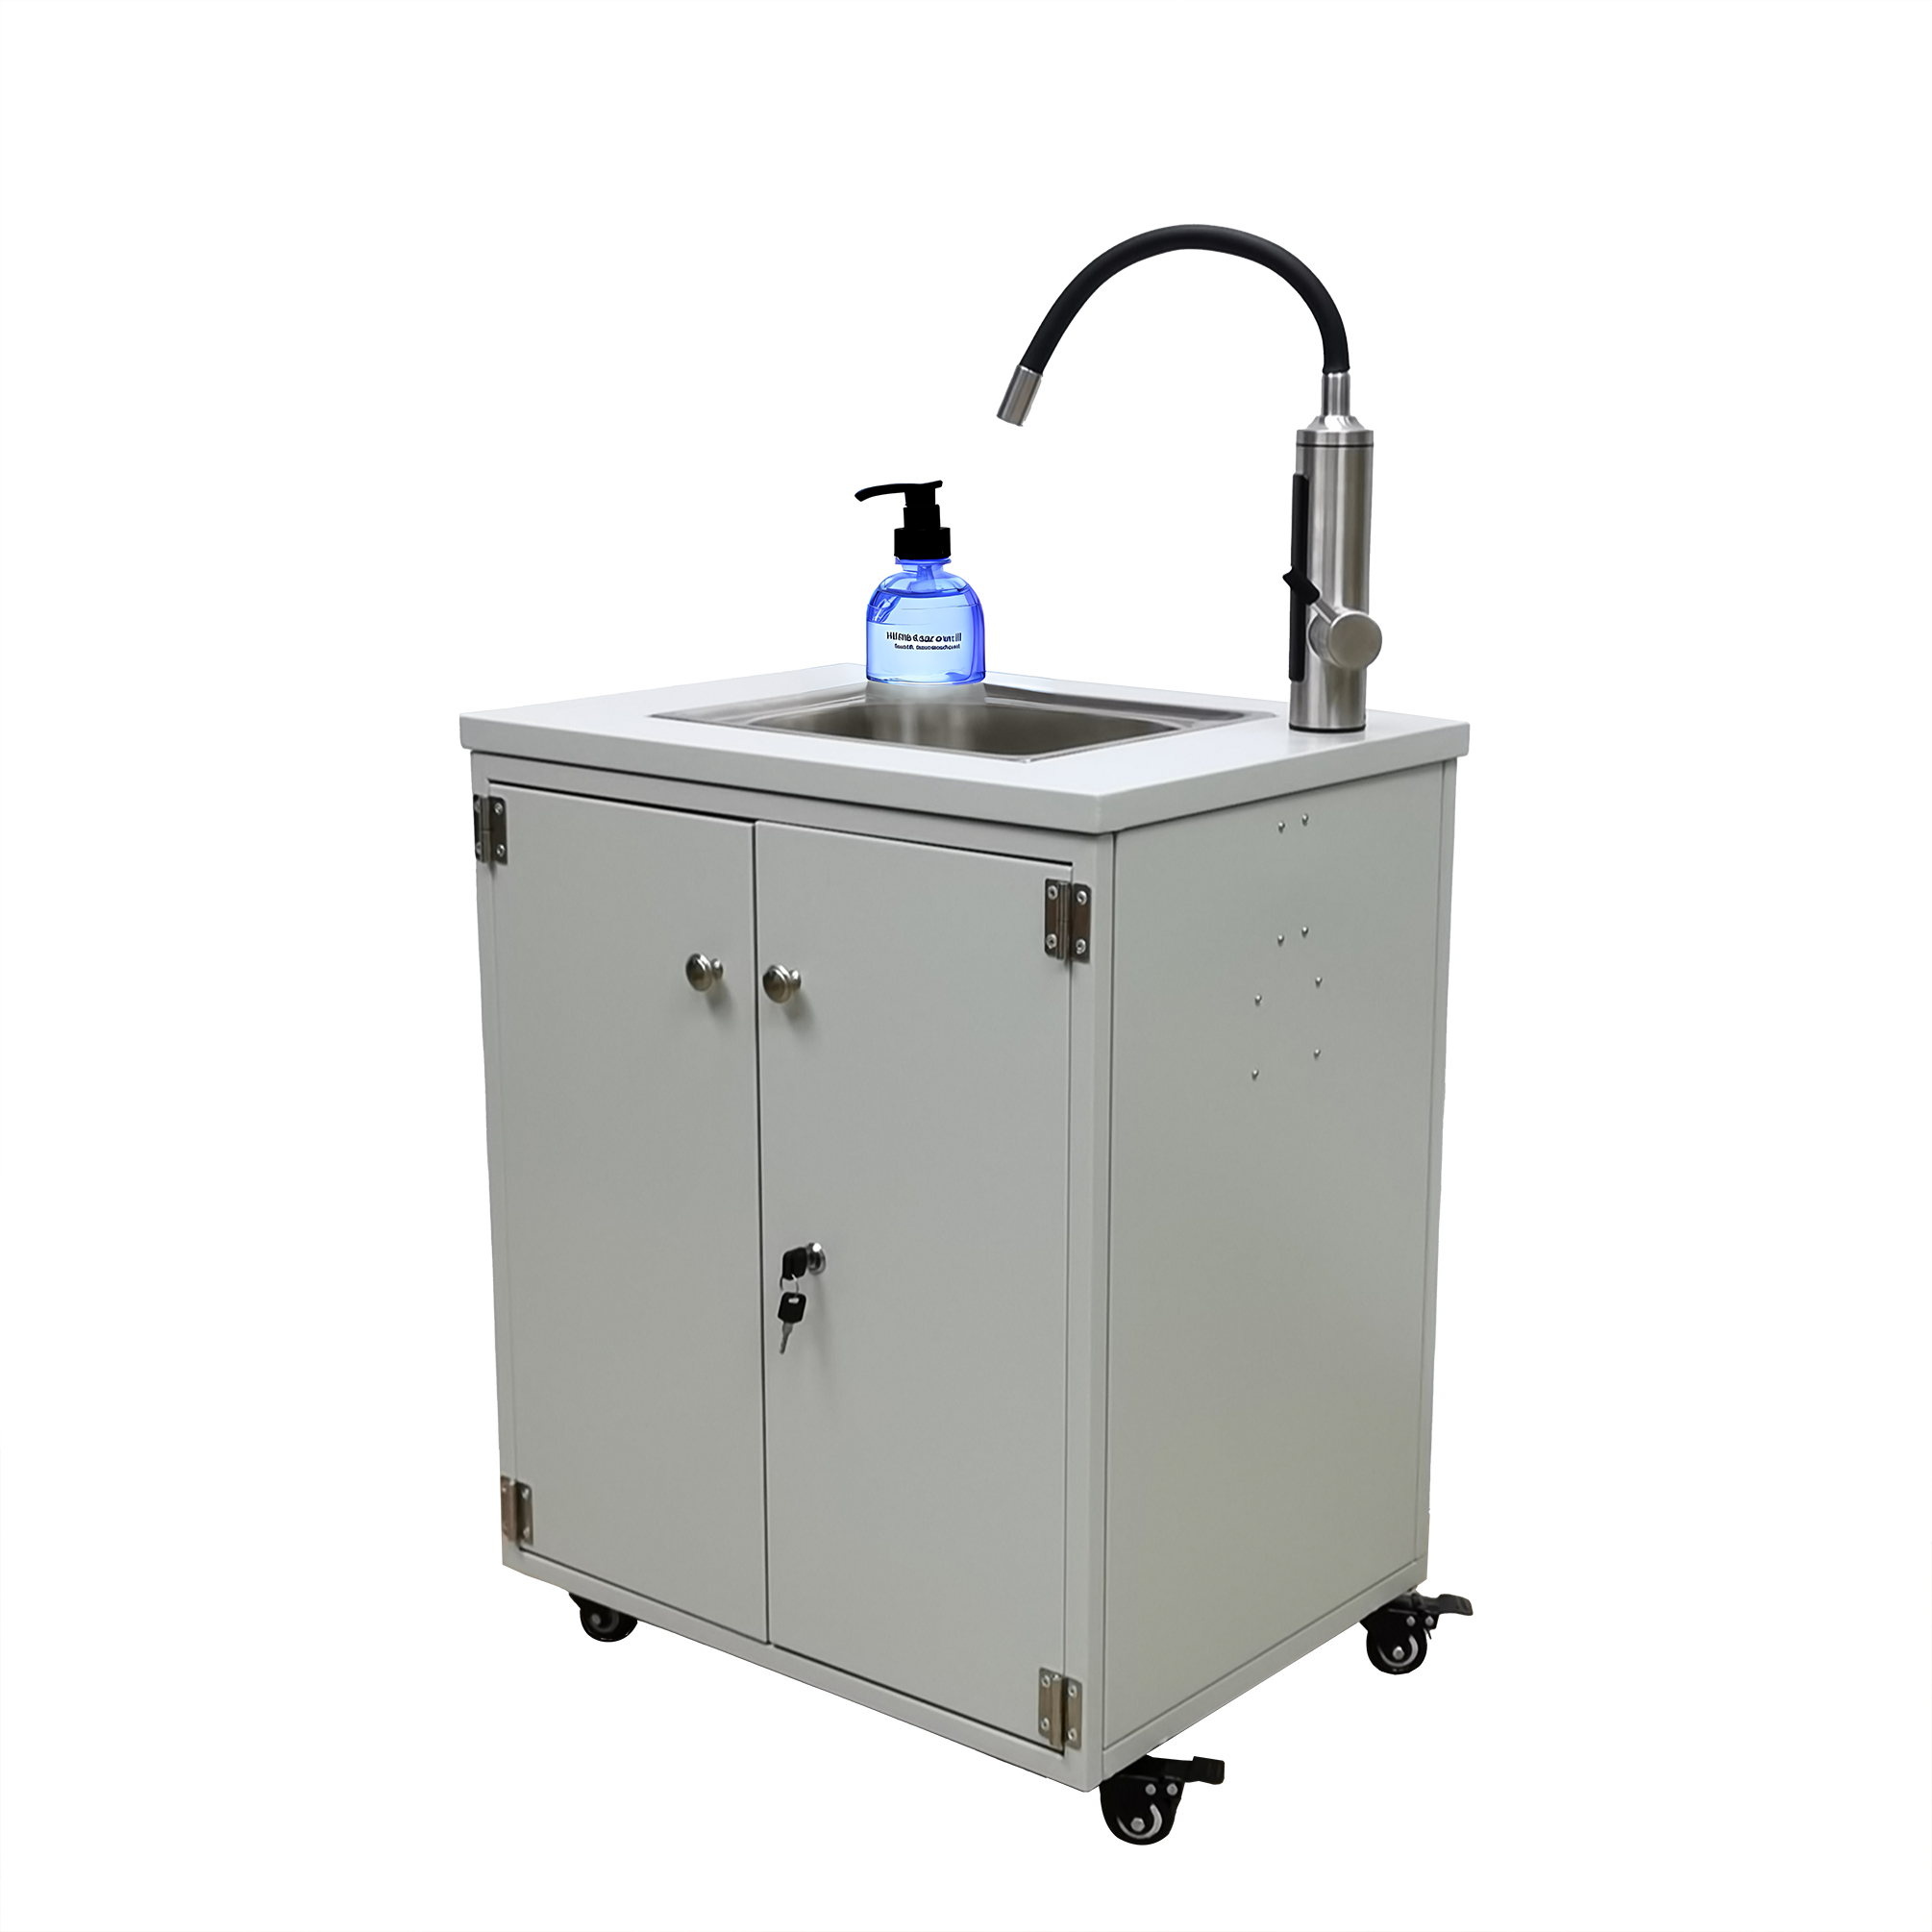 FixtureDisplays 24 X 18.3 X 39" Portable Mobile Sink Steel Cabinet Hot Water Digital Temperature Control Self Contained Hand Wash Station Food